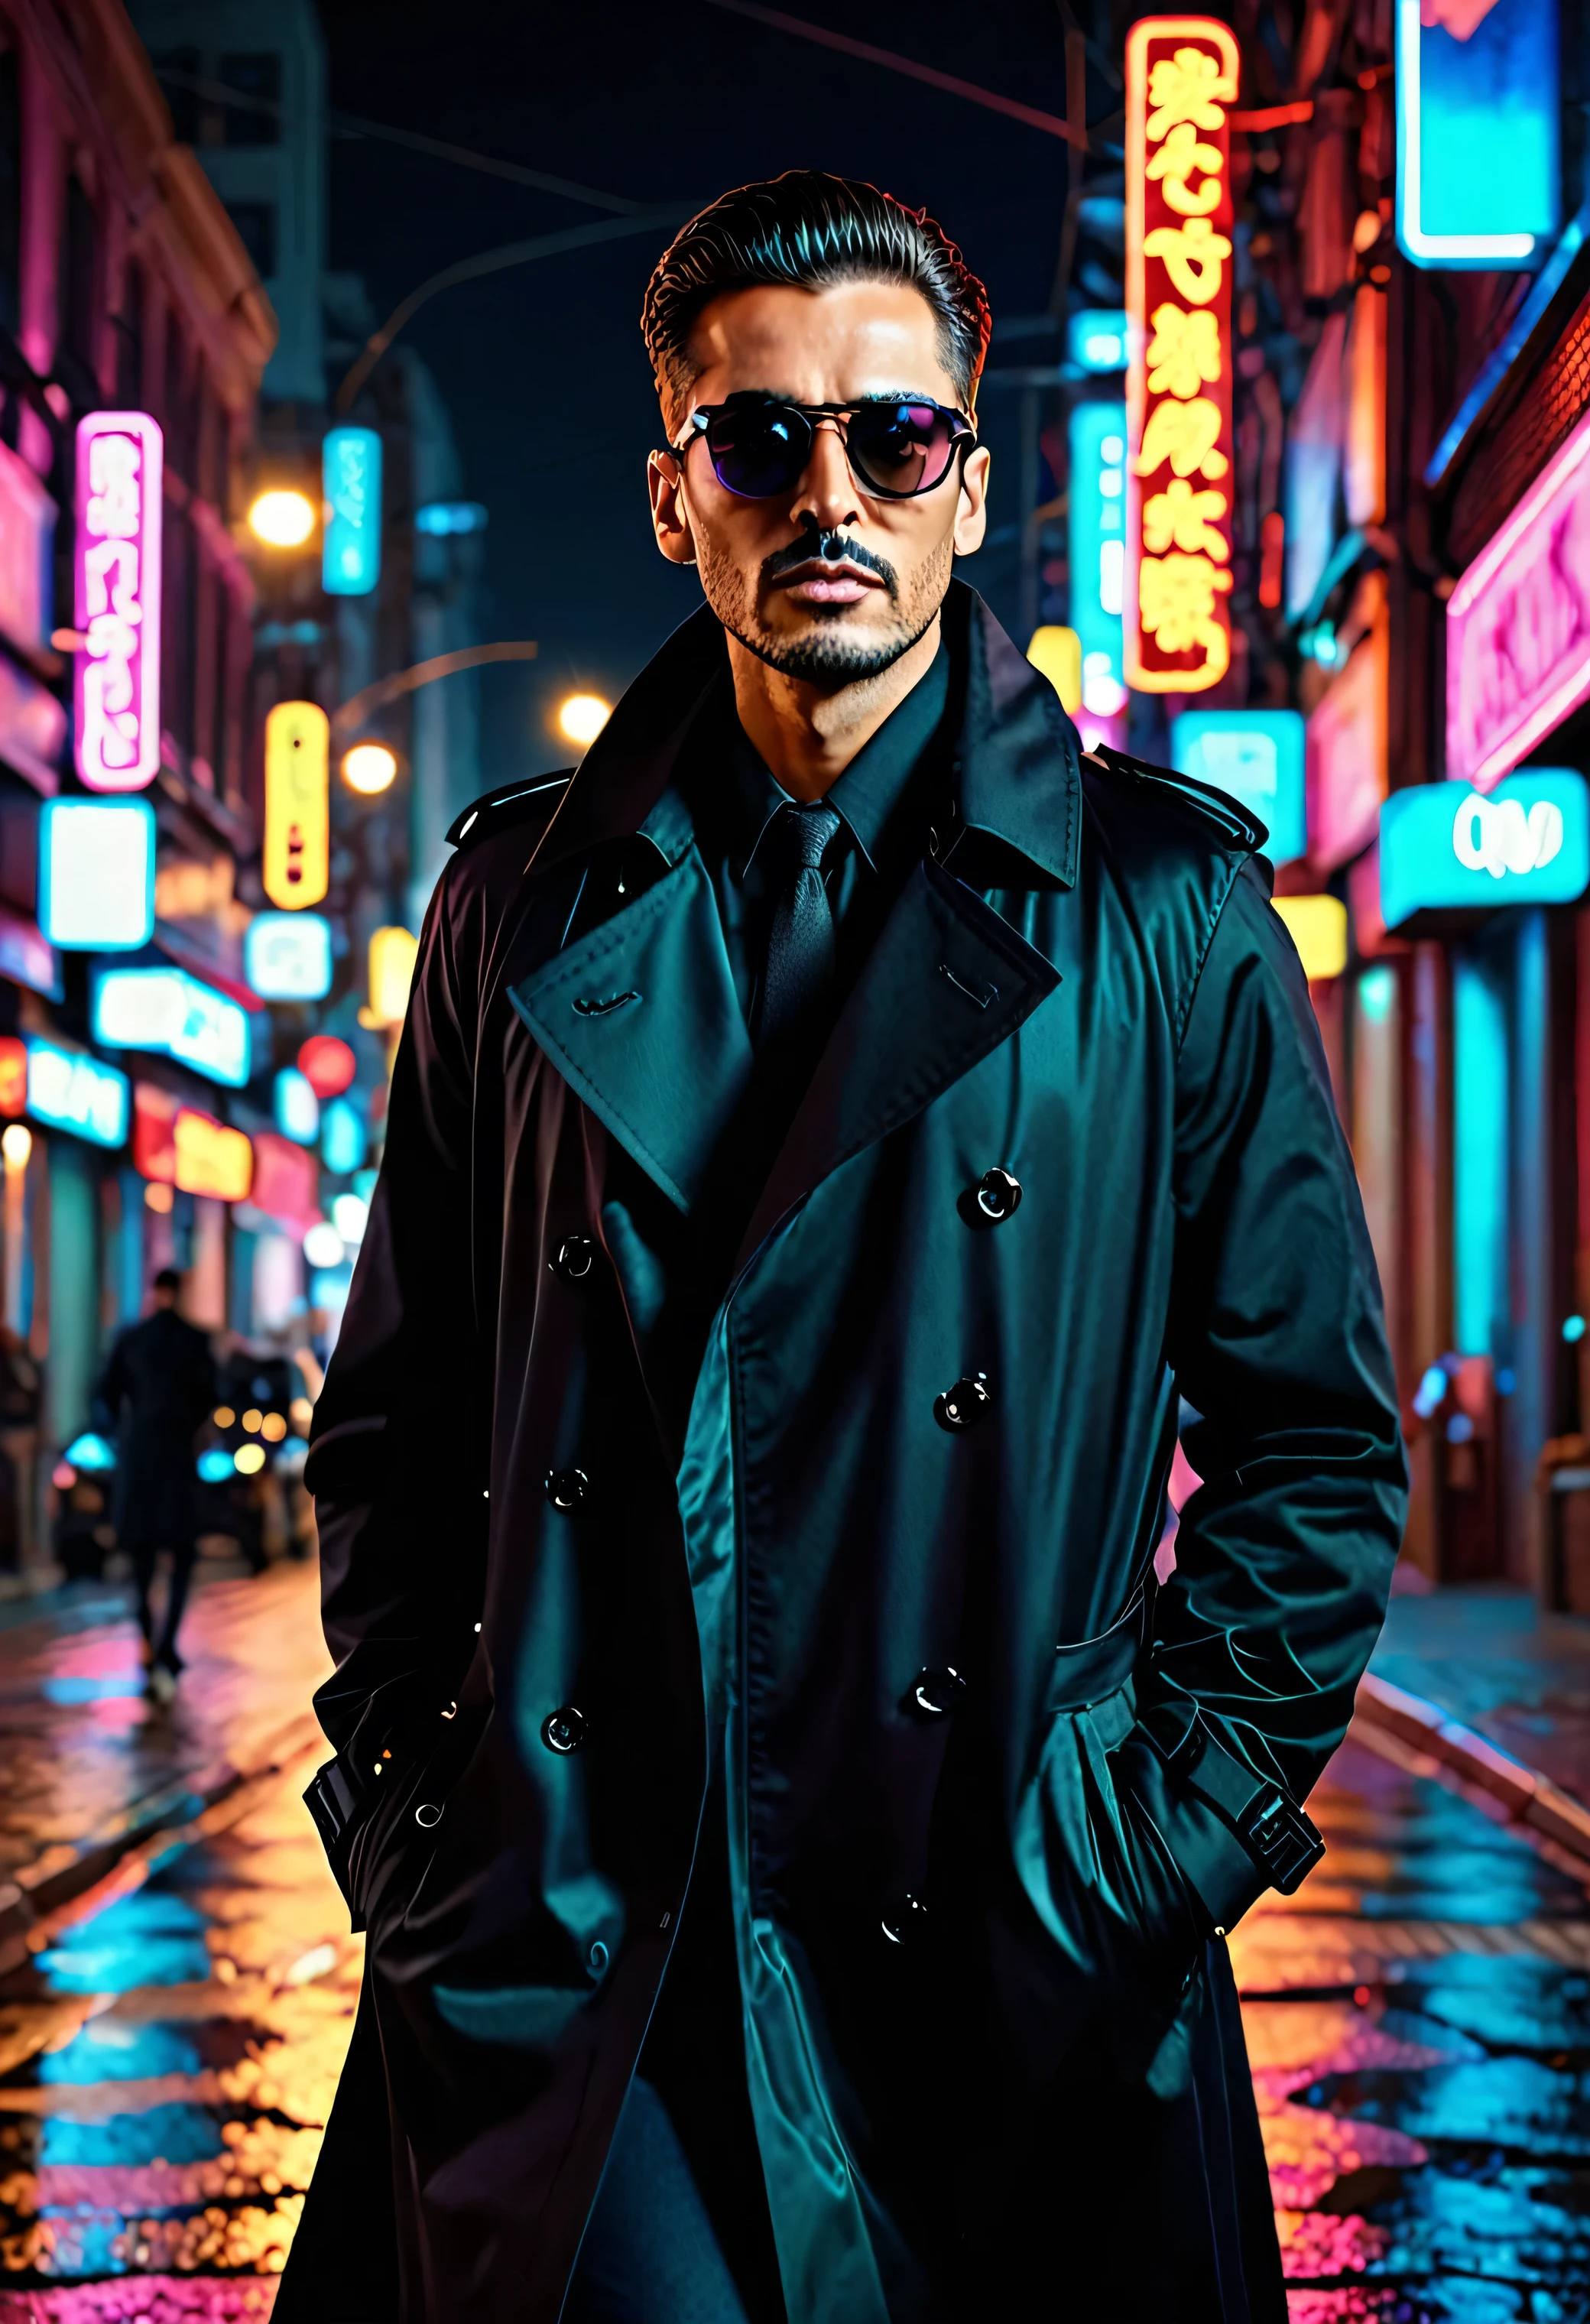  (masterpiece, best quality, high resolution),1man in a black trench coat and sunglasses, a city street at night with neon lights, 8k